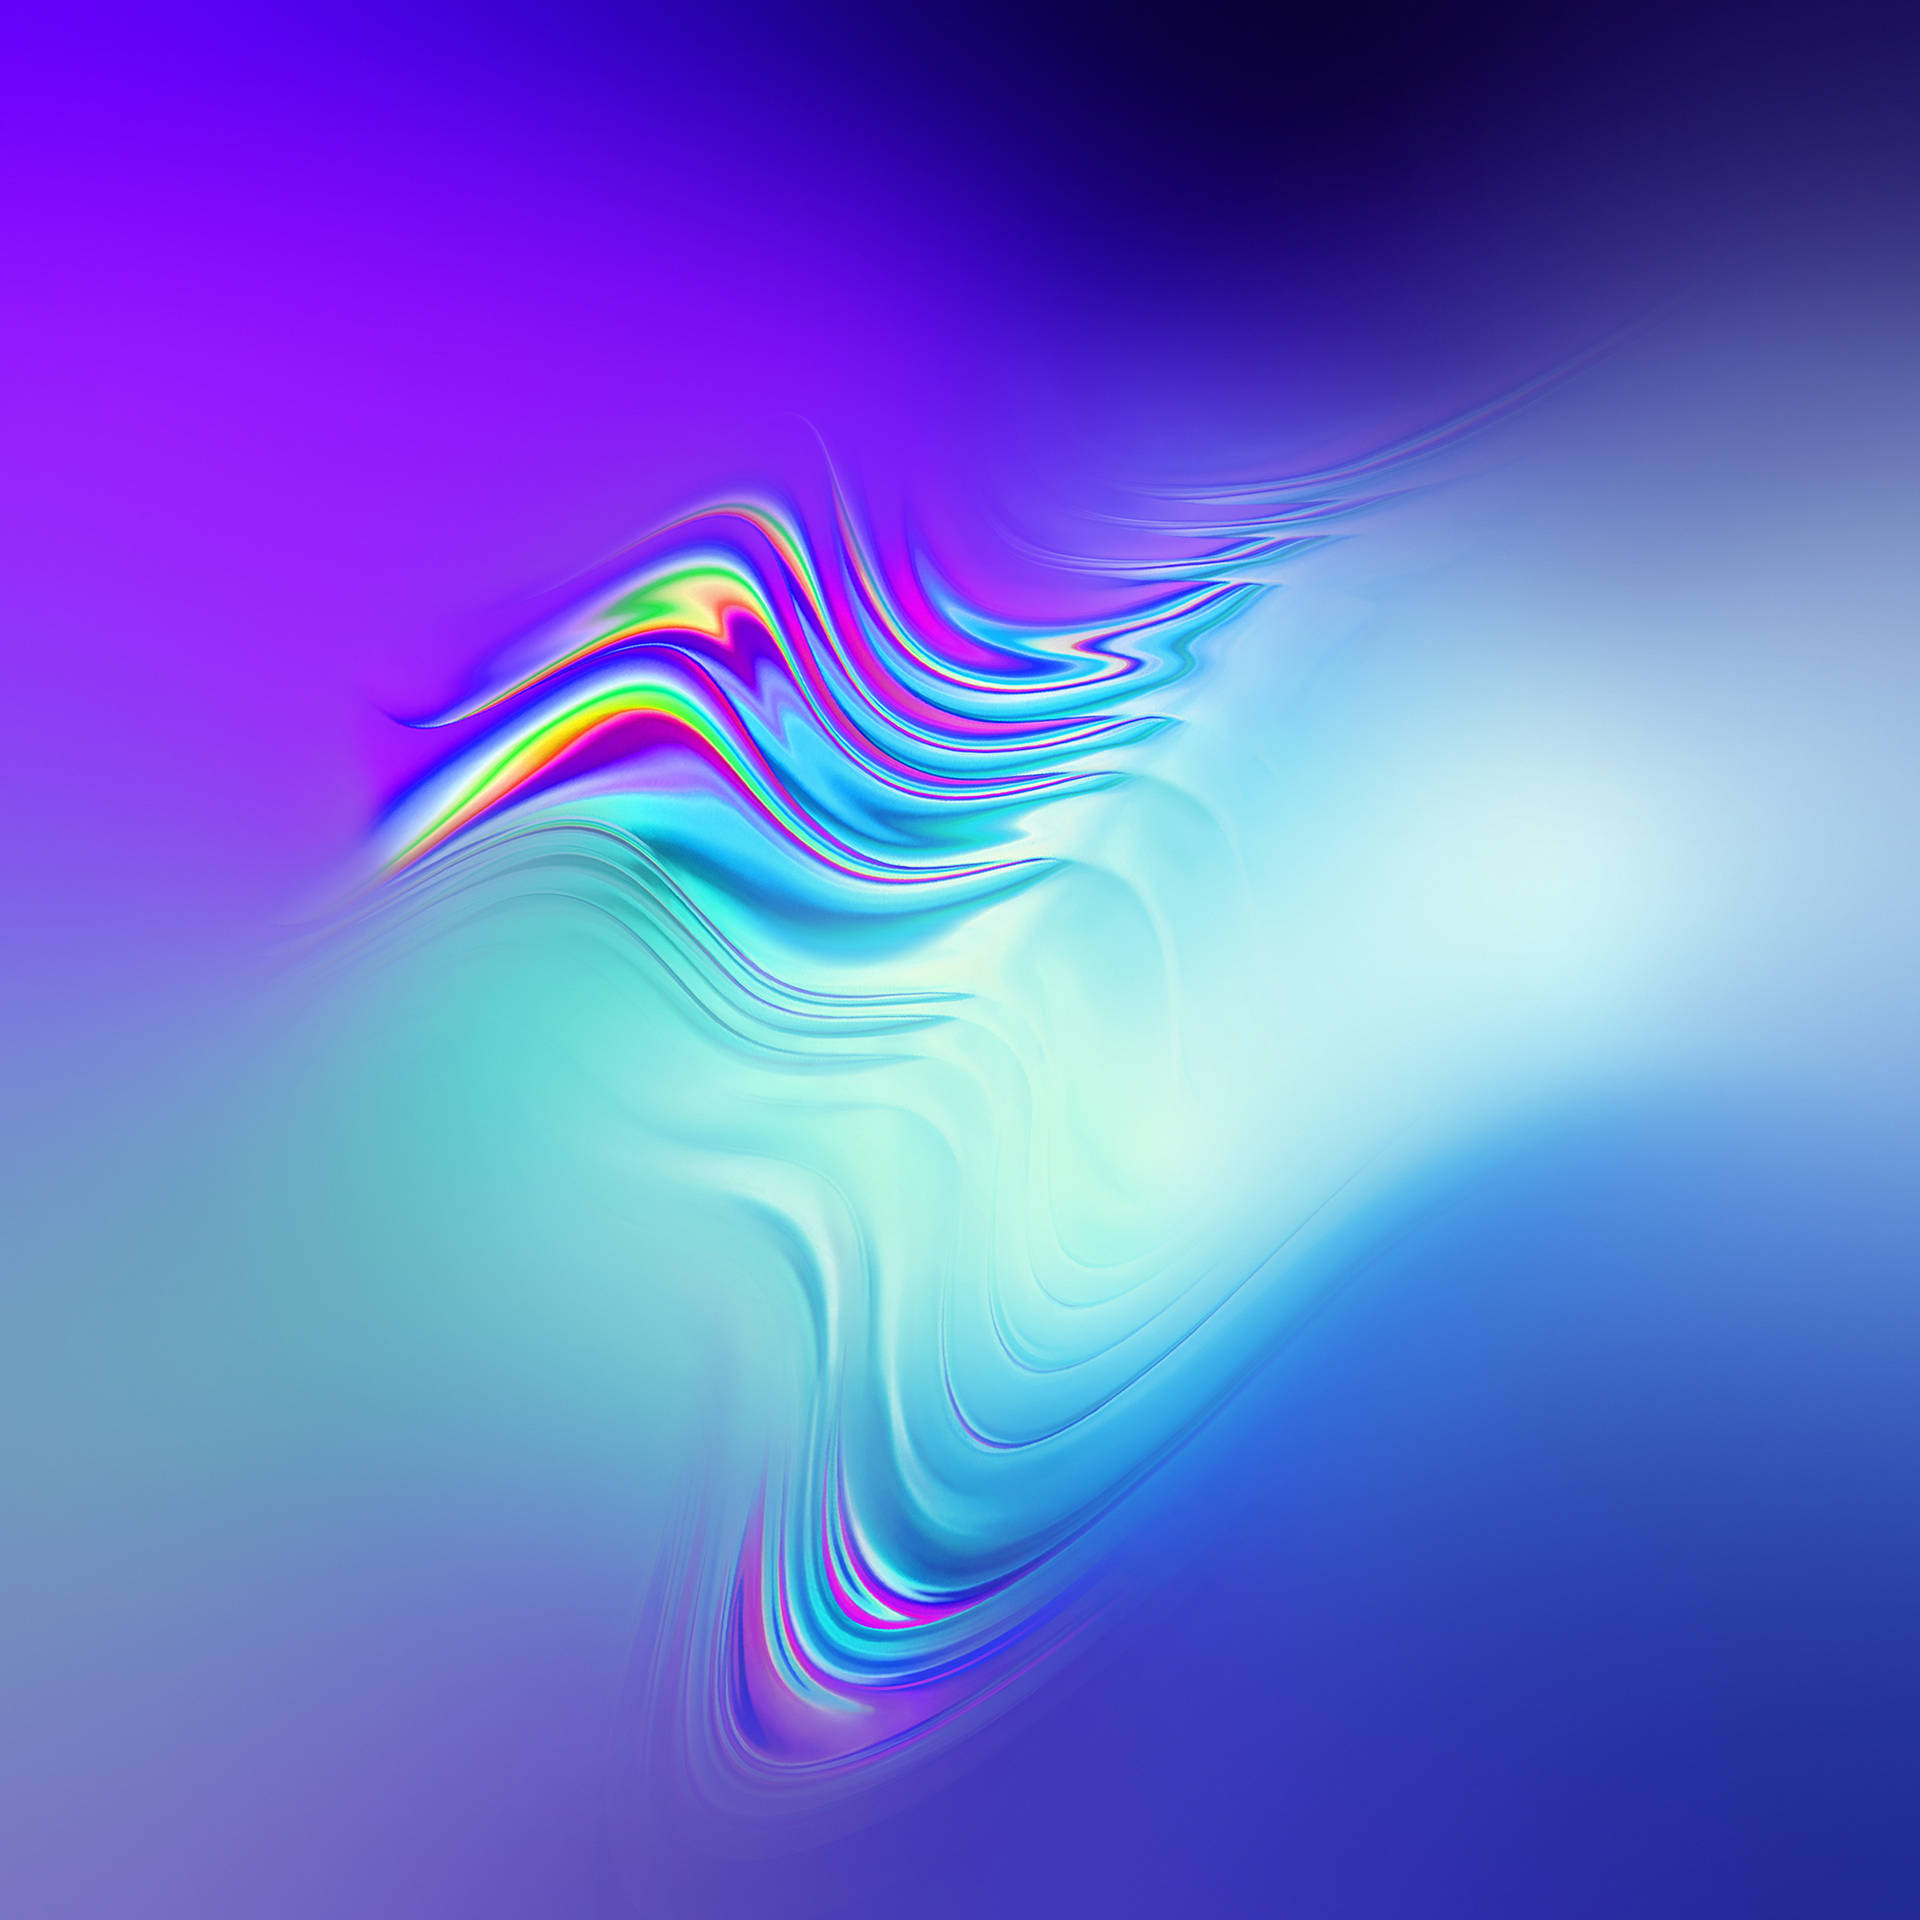 Distorted blue and purple S10 smartphone Wallpaper